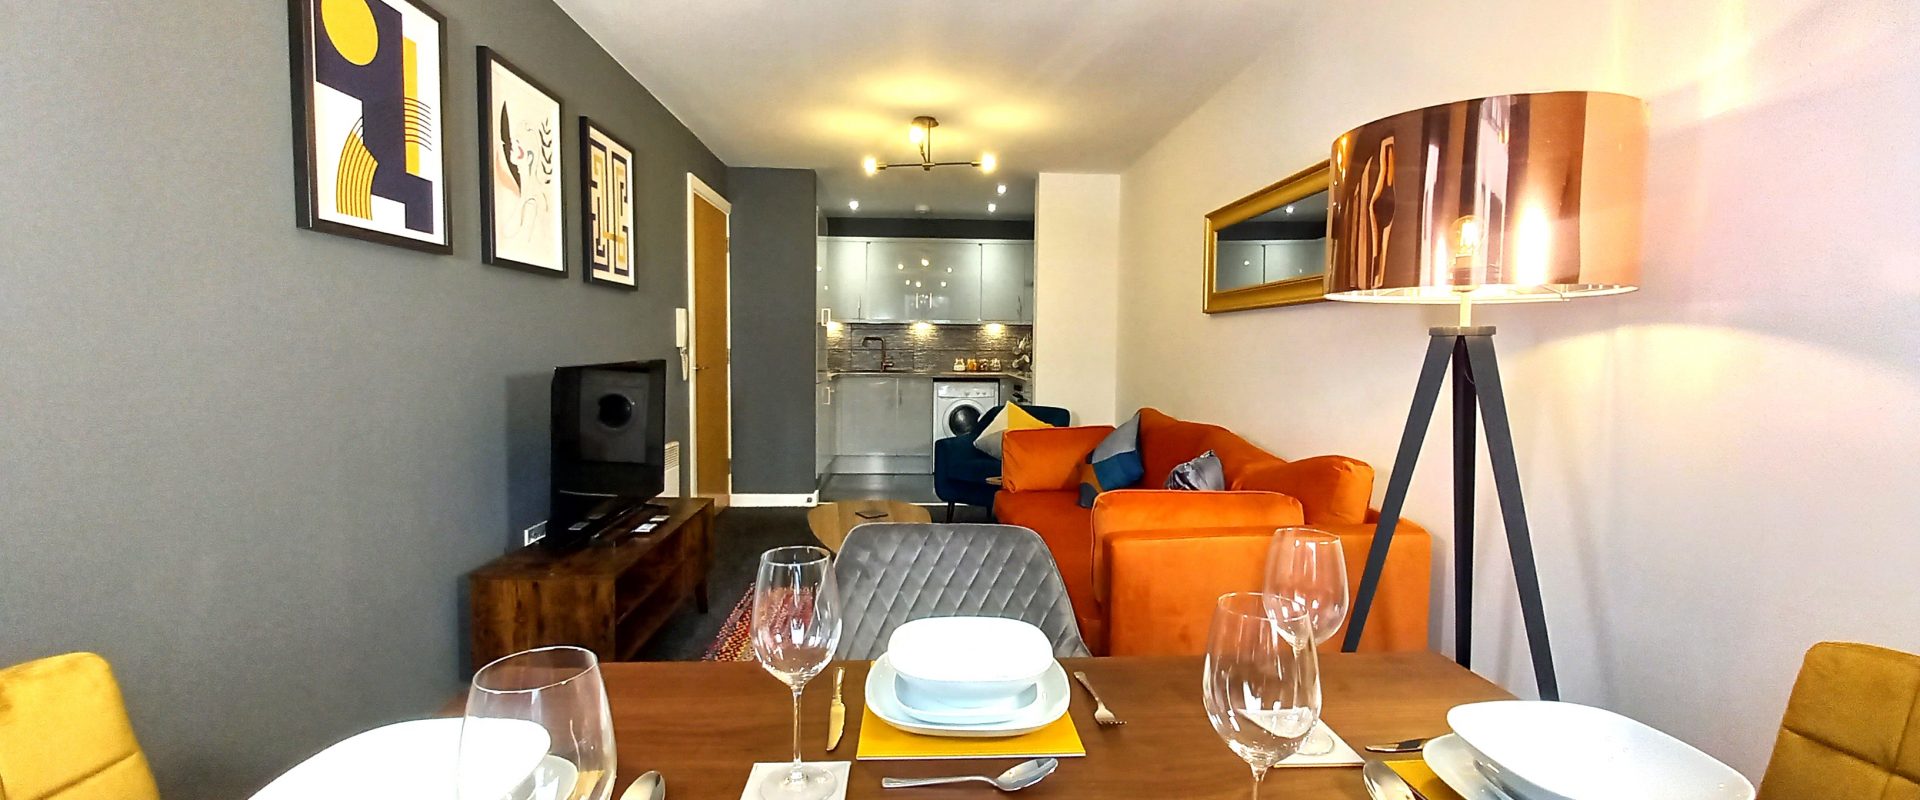 LUXURY SERVICED 2 BEDROOMS WITH 2 BATHROOMS APARTMENTS AVAILABLE